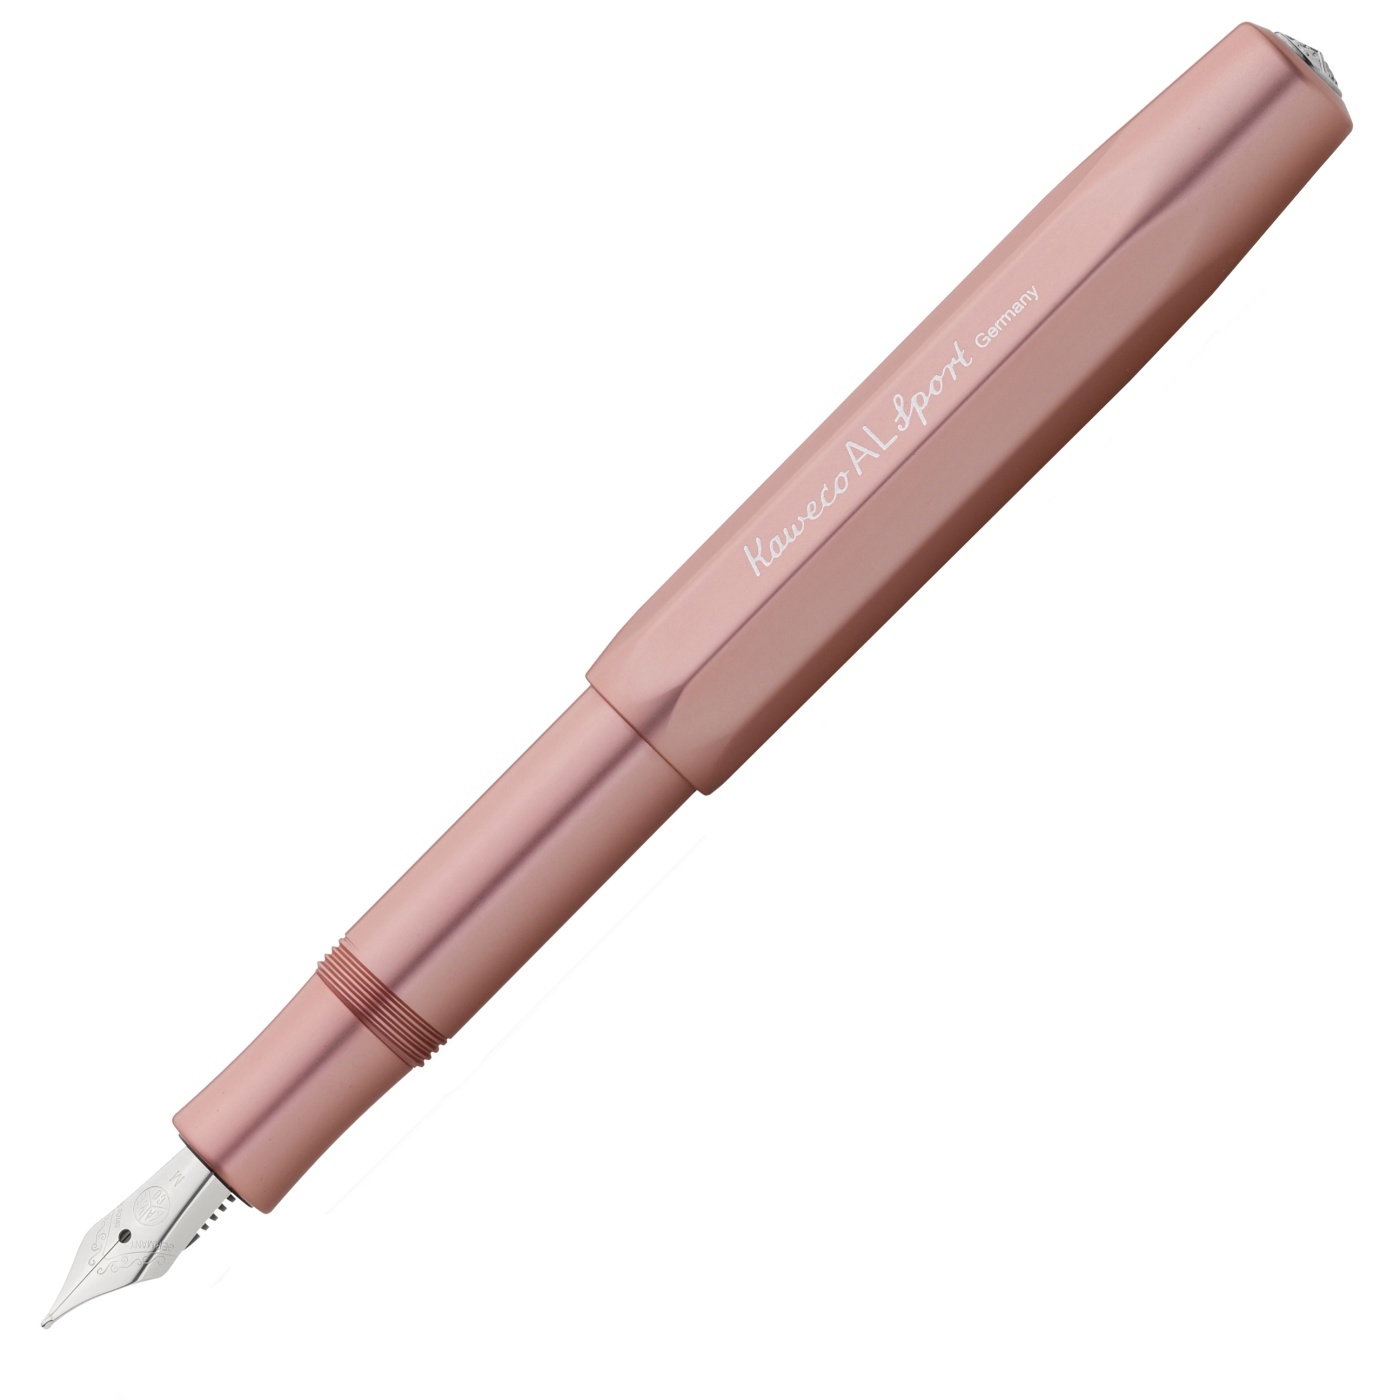 AL Sport Rosegold Fountain pen in the group Pens / Fine Writing / Gift Pens at Pen Store (102230_r)